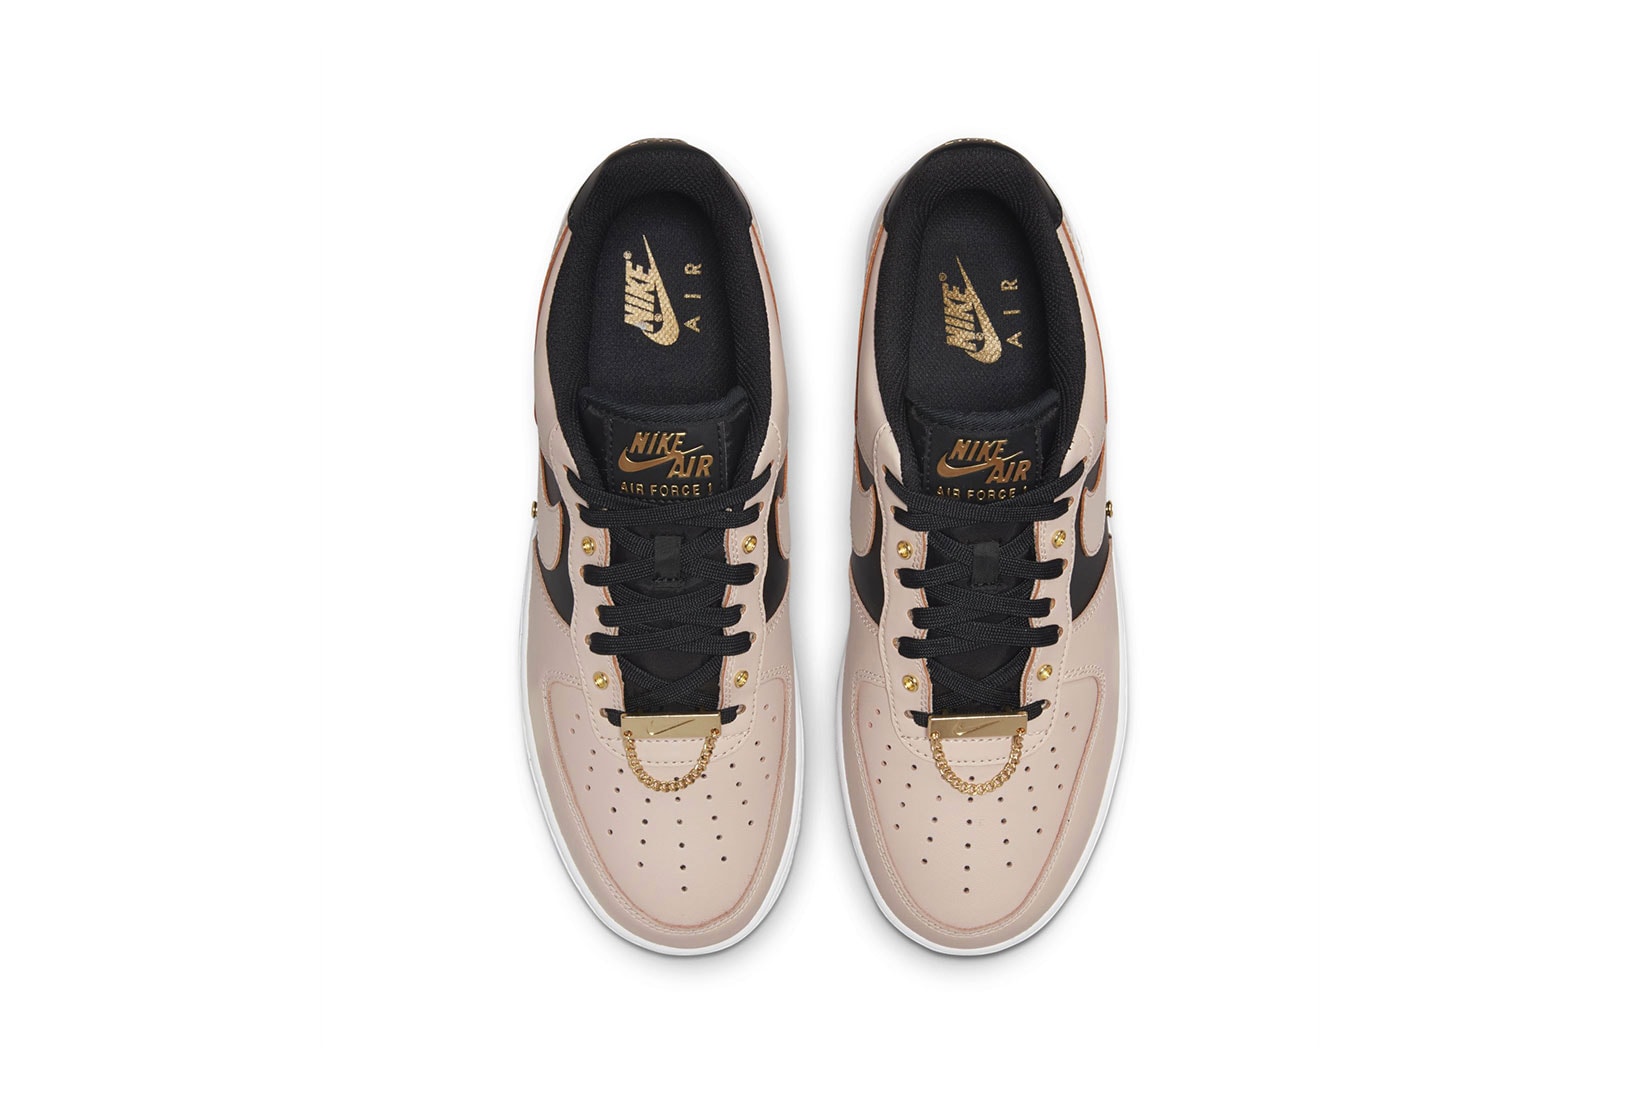 Nike Air Force 1 AF1 Particle Beige Tan Black Gold White Sneakers Shoes Kicks Footwear Aerial Top View Insole